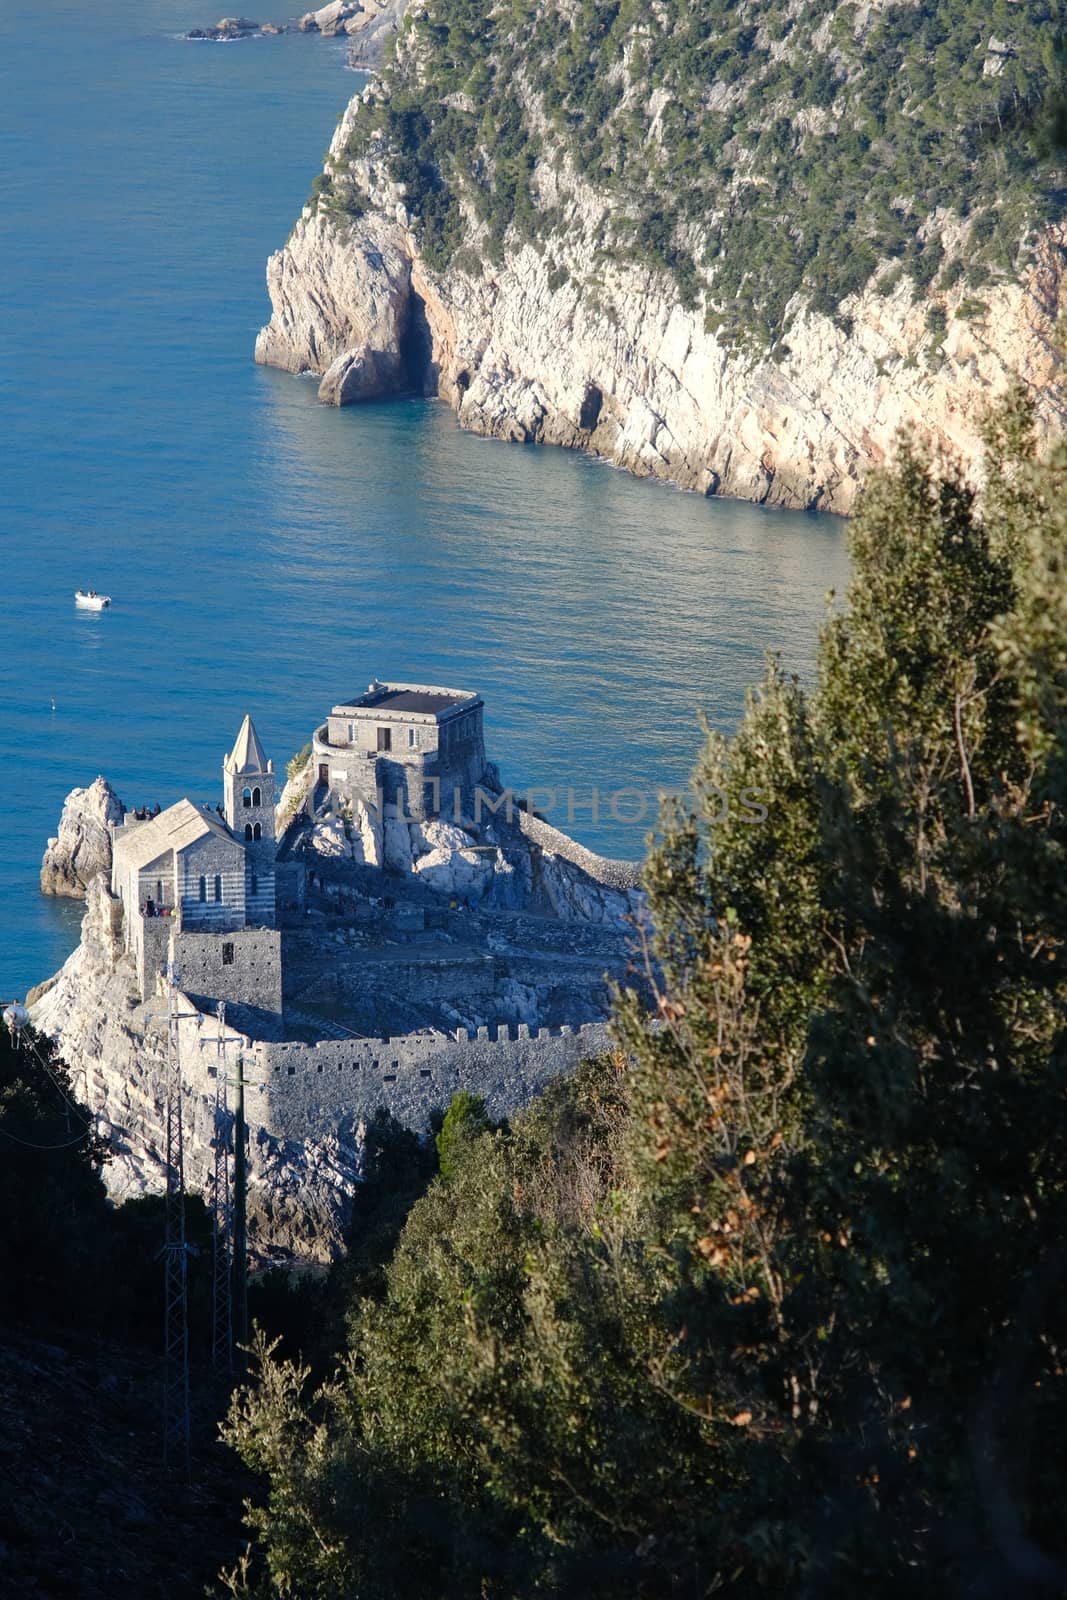 Church of San Pietro in Portovenere on the rocks overlooking the sea. Ancient medieval building near the Cinque Terre in Liguri. Italy.